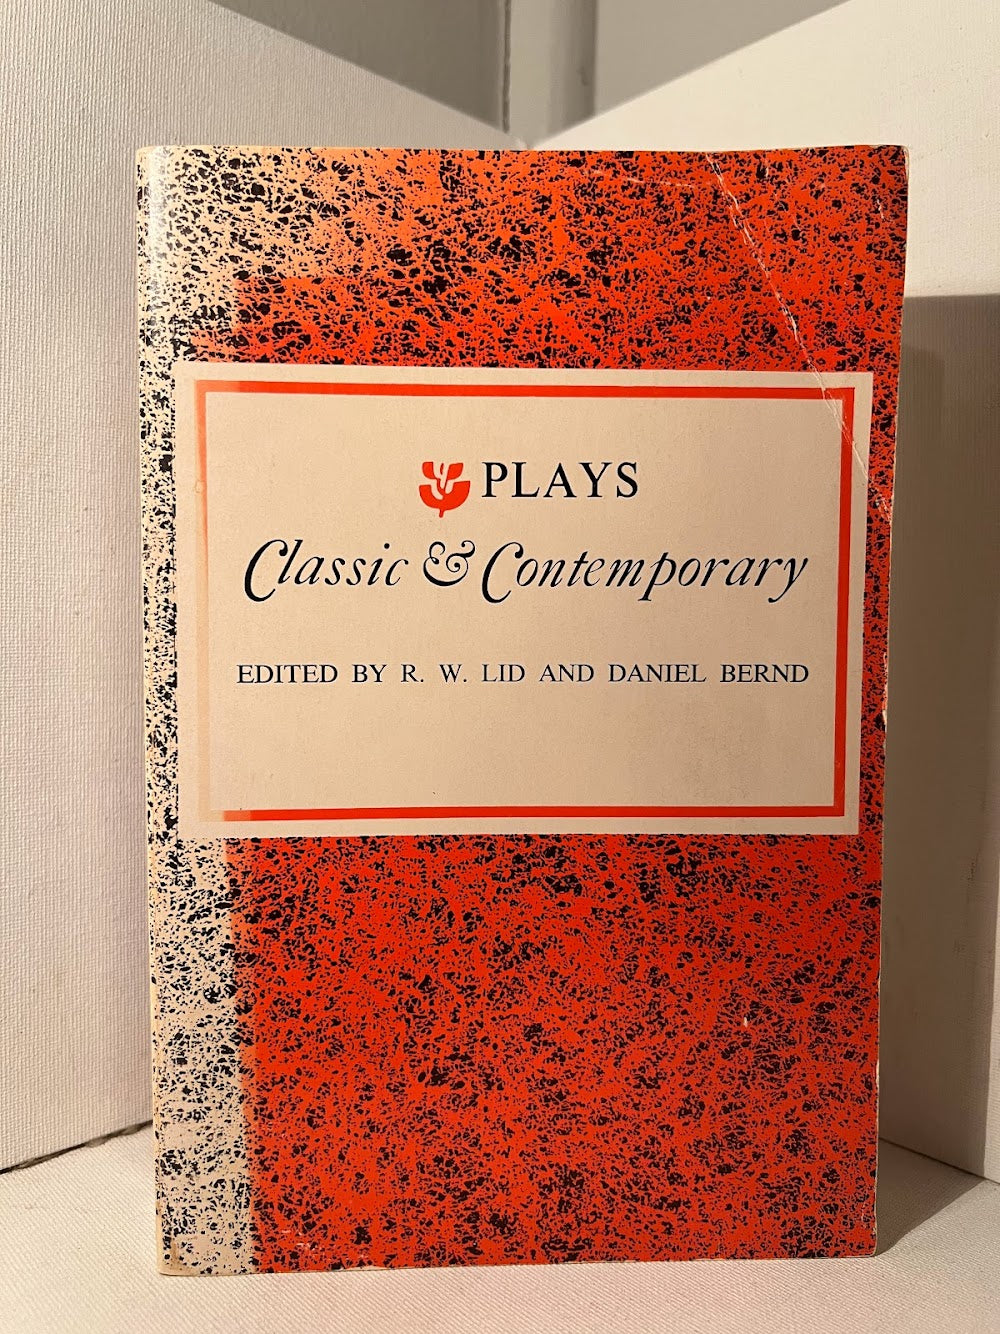 Classic & Contemporary Plays edited by R.W. Lid and Daniel Bernd